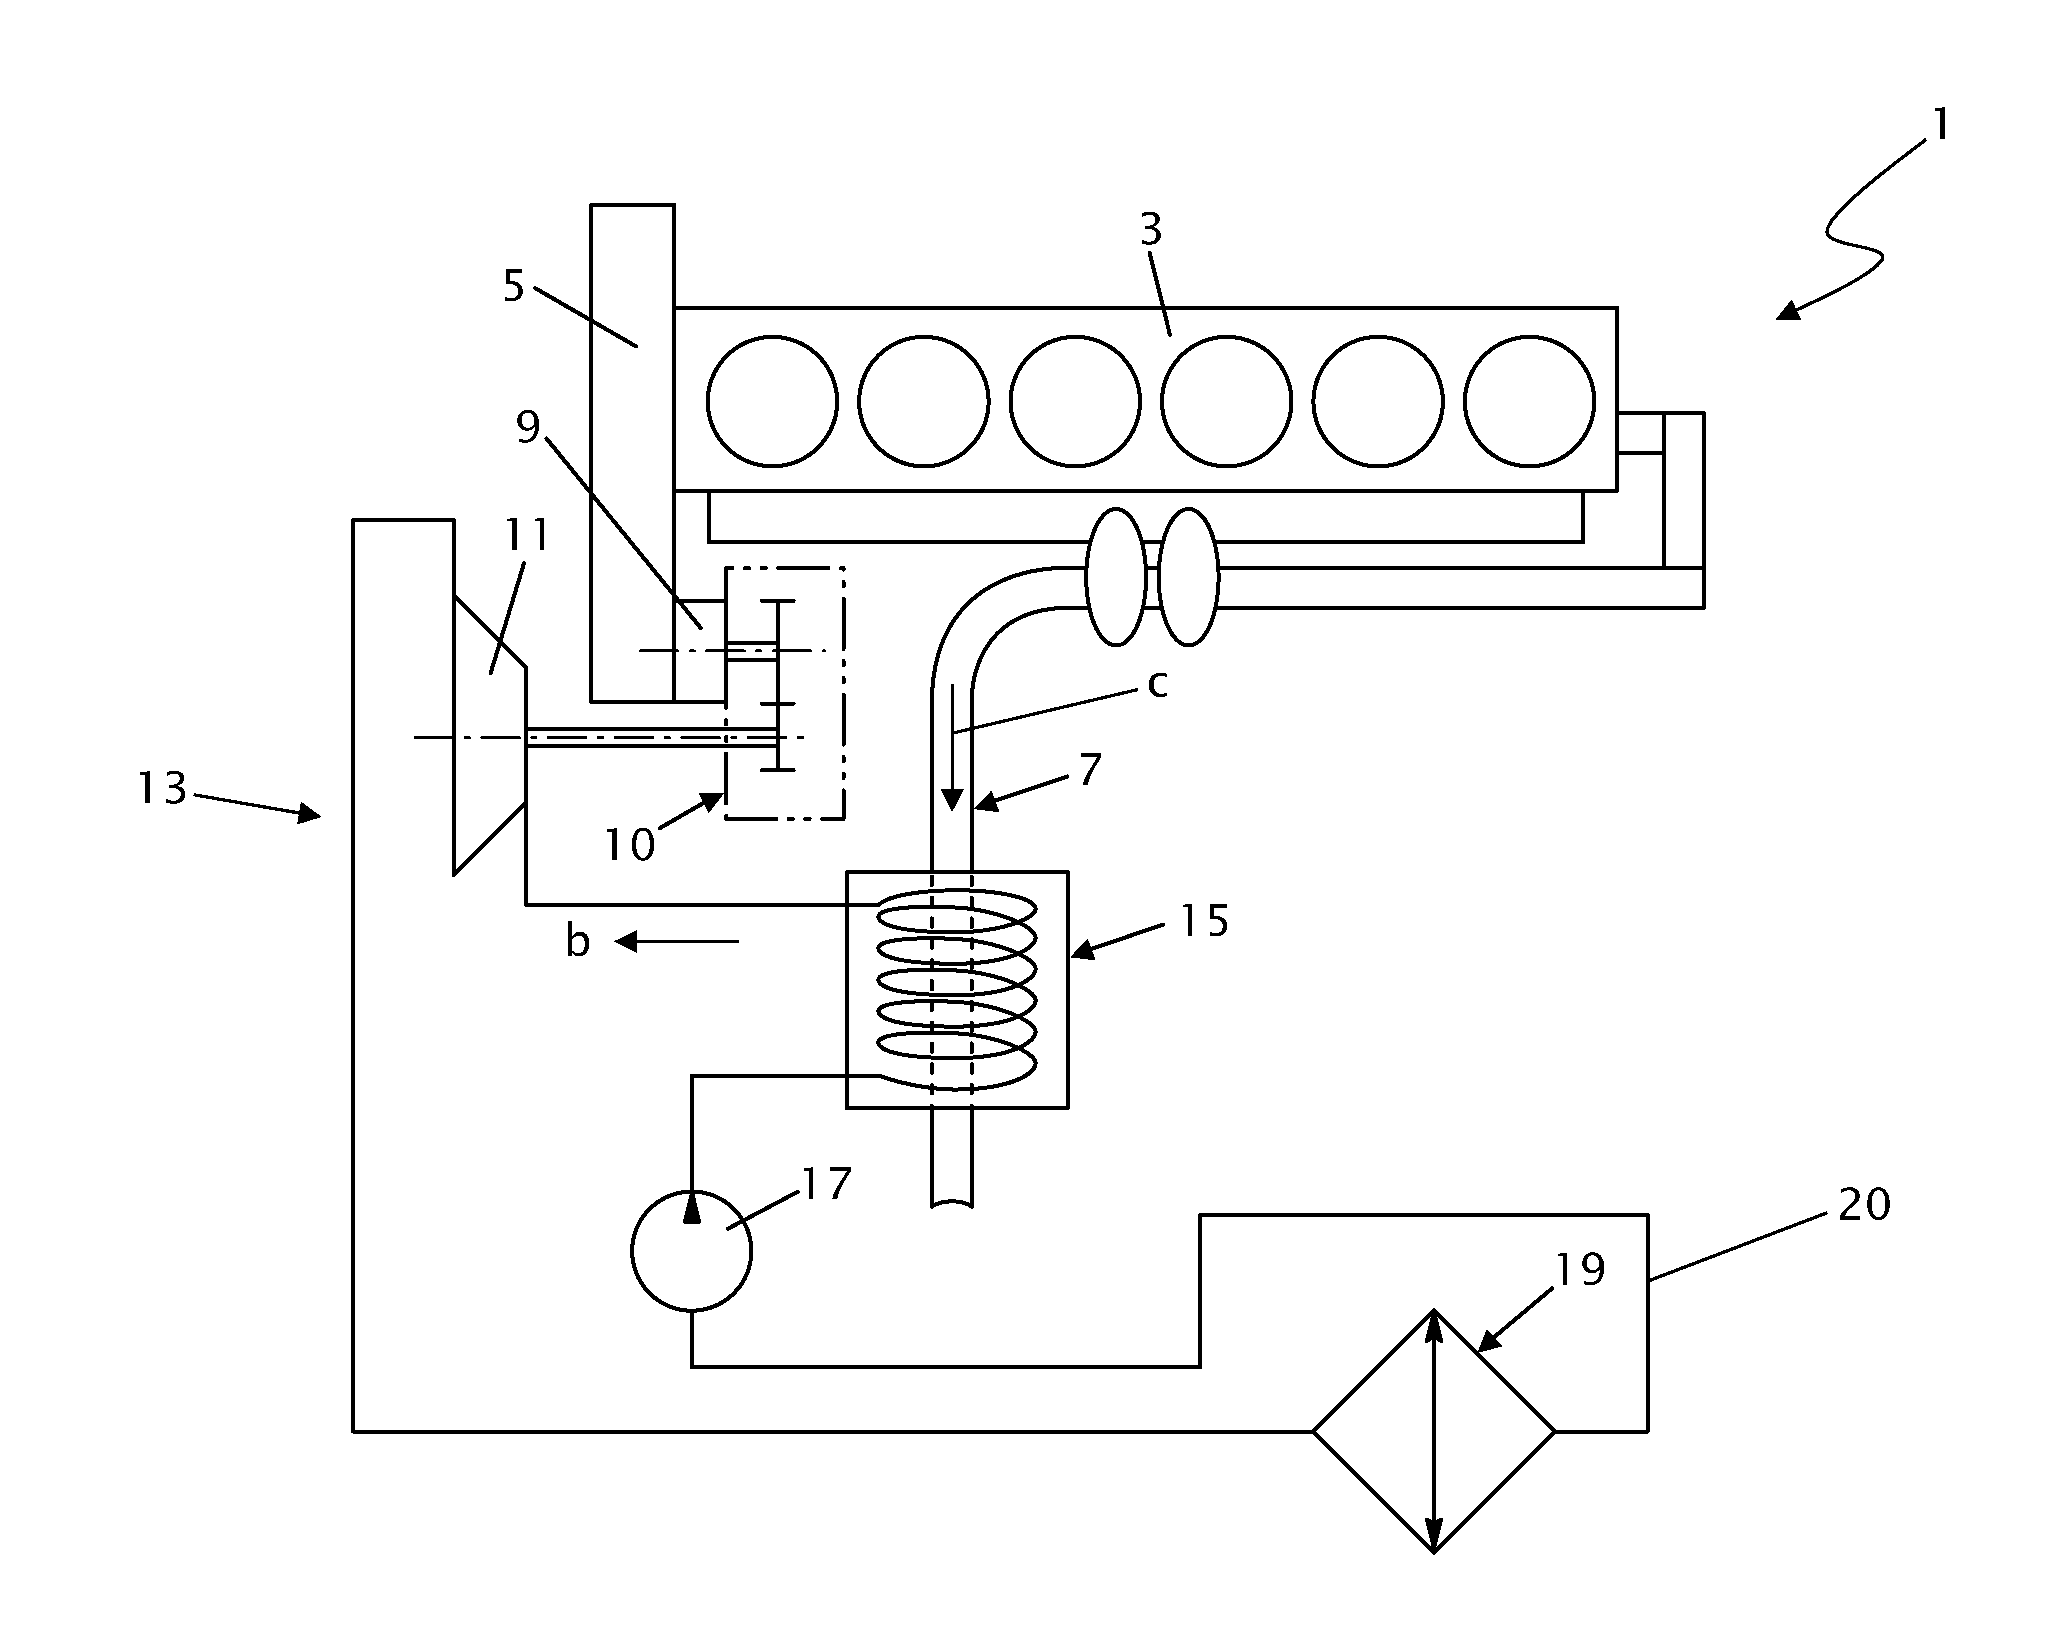 Construction vehicle with waste heat recovery